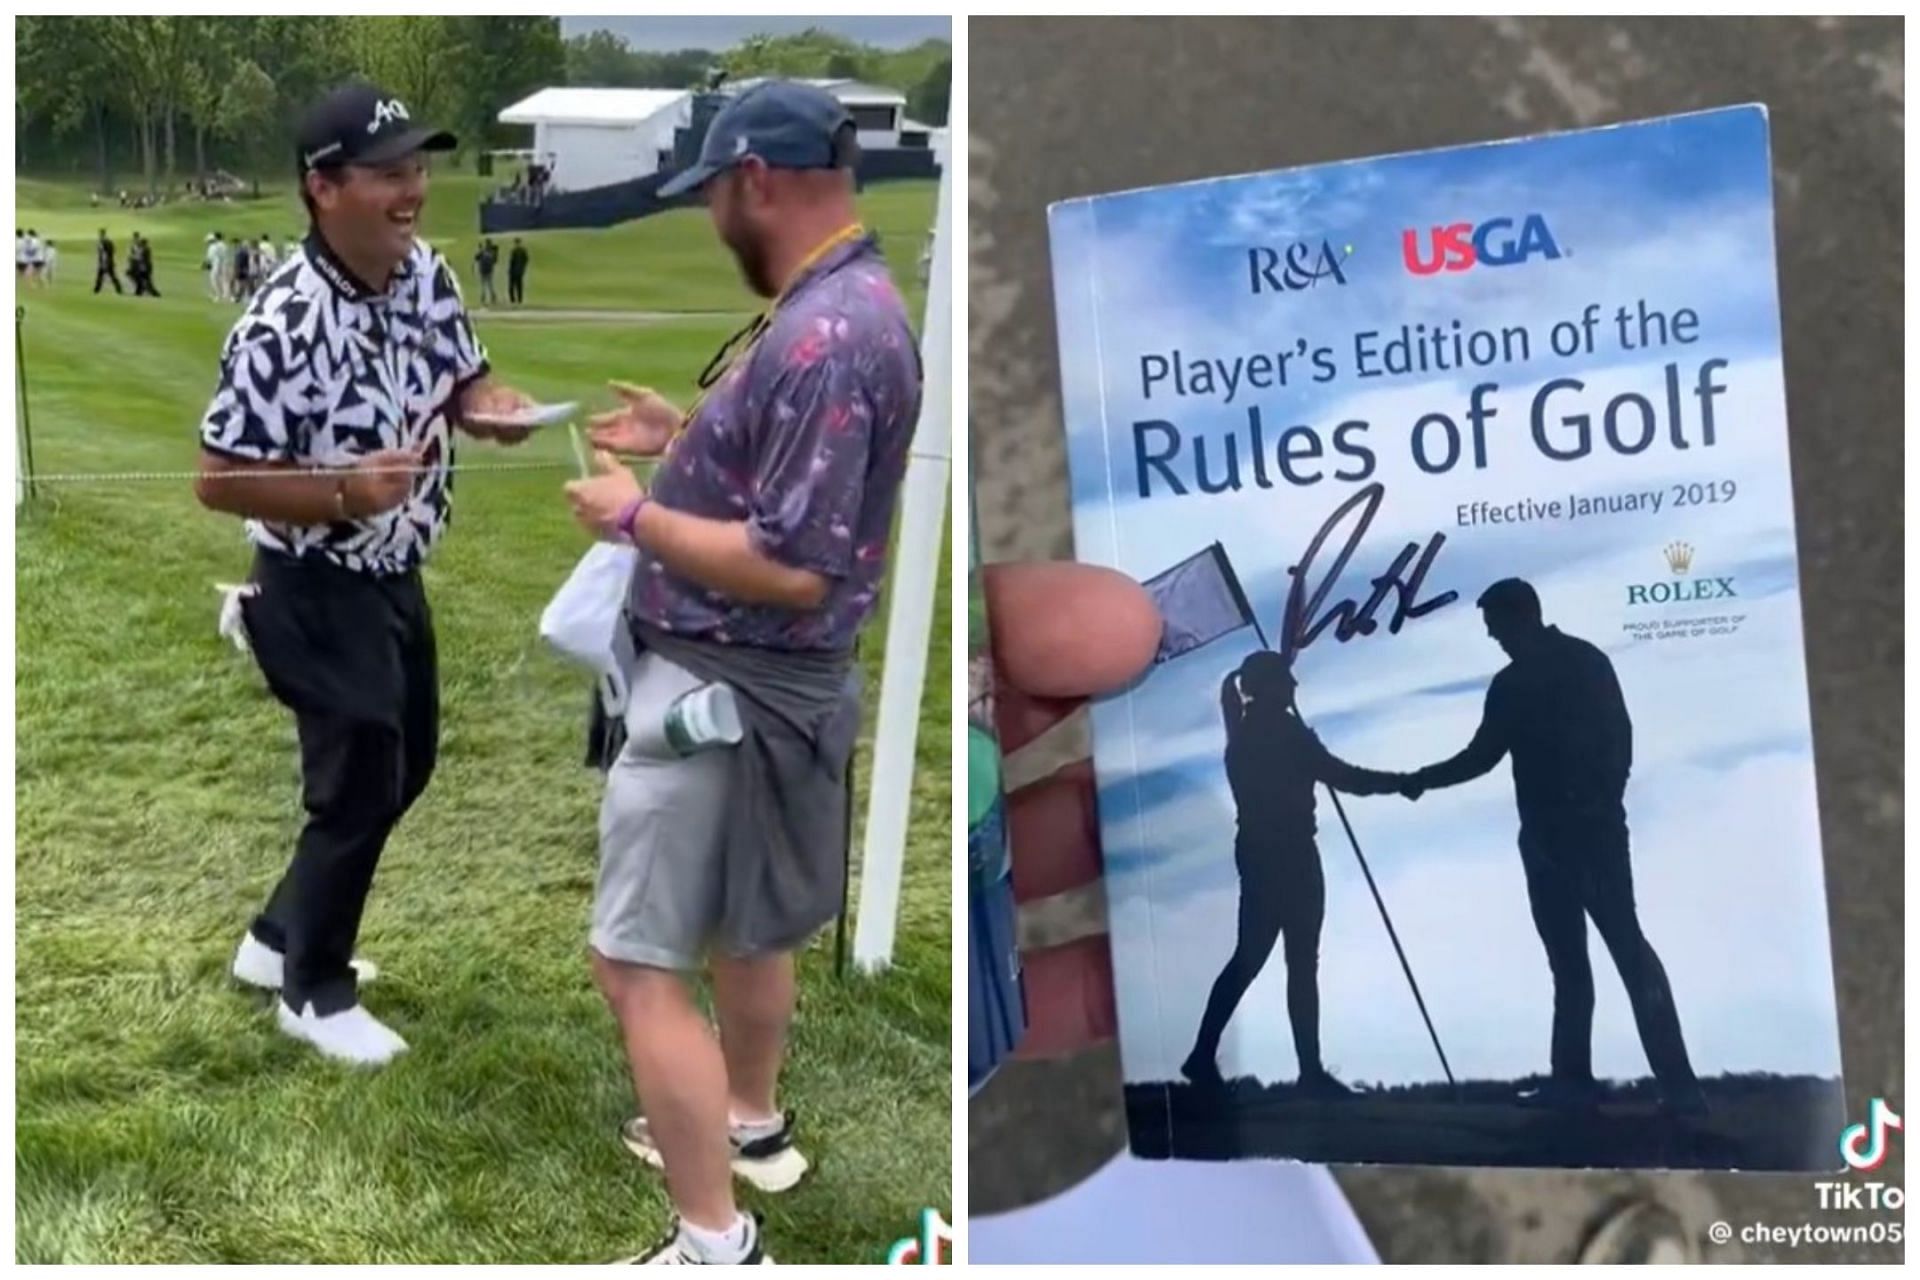 Patrick Reed signs a copy of the &lsquo;Player&rsquo;s edition of the rules of golf&rsquo; for fan